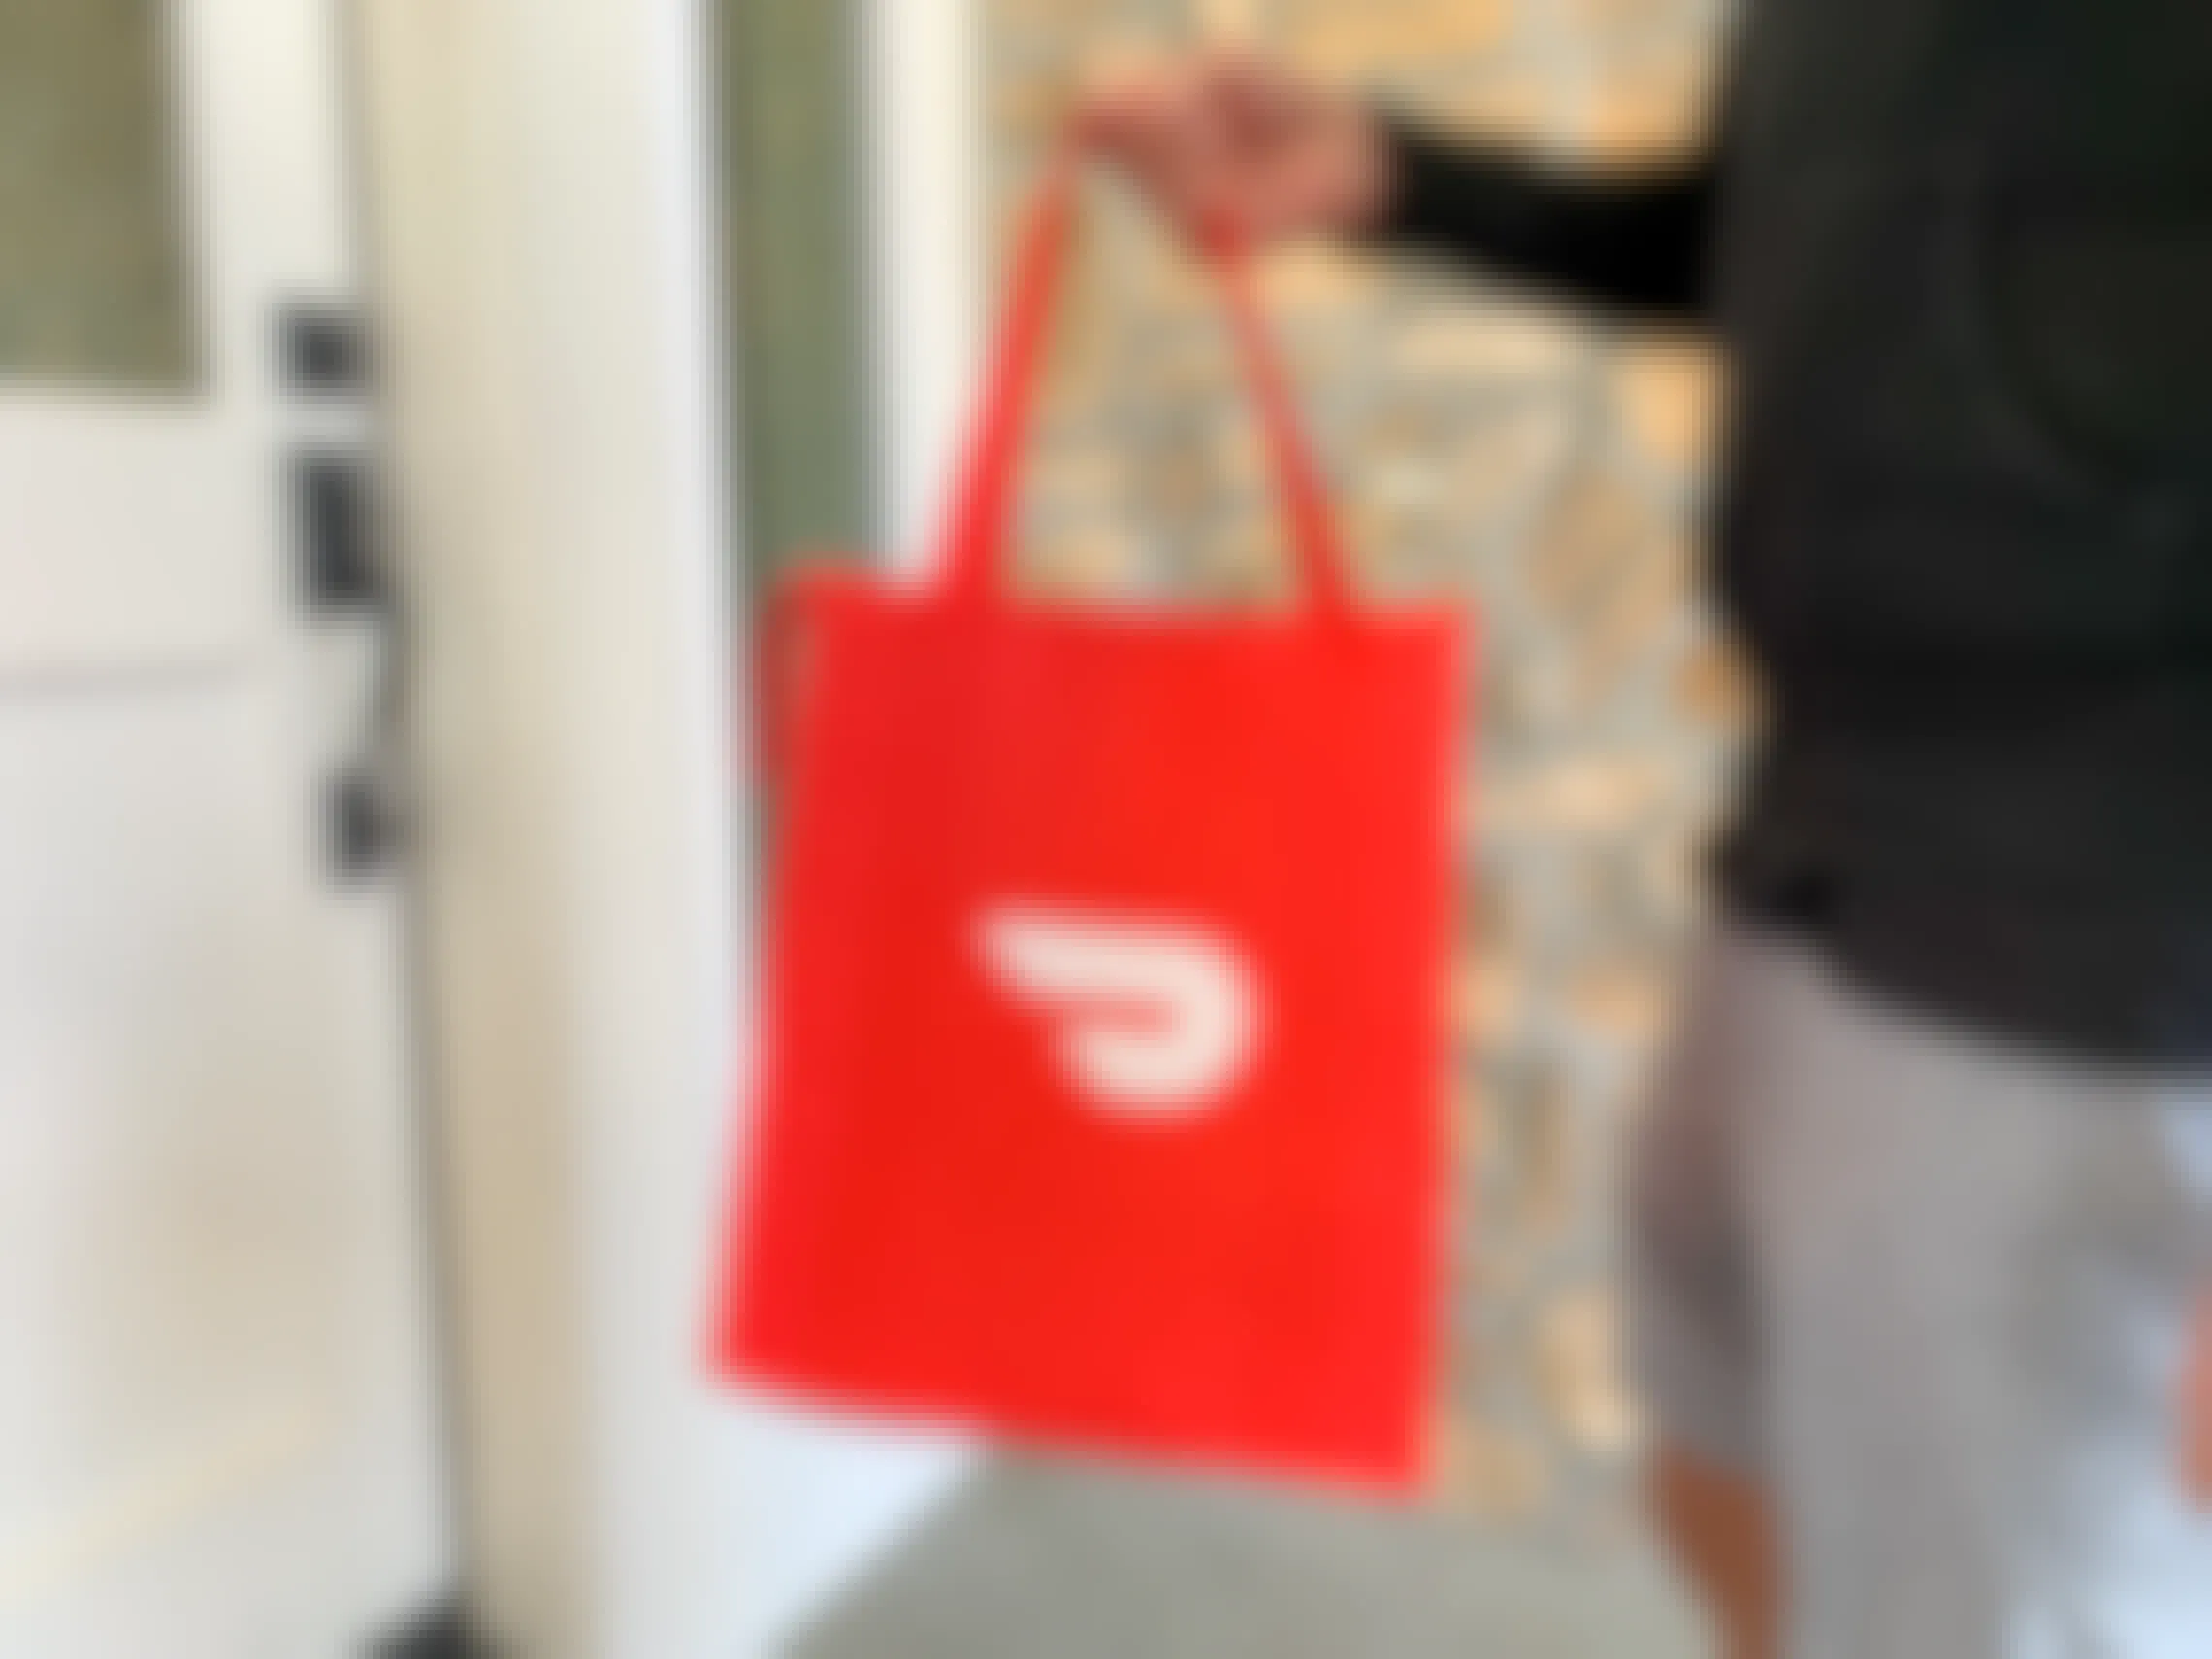 A man standing on a front porch, delivering food in a doordash bag.